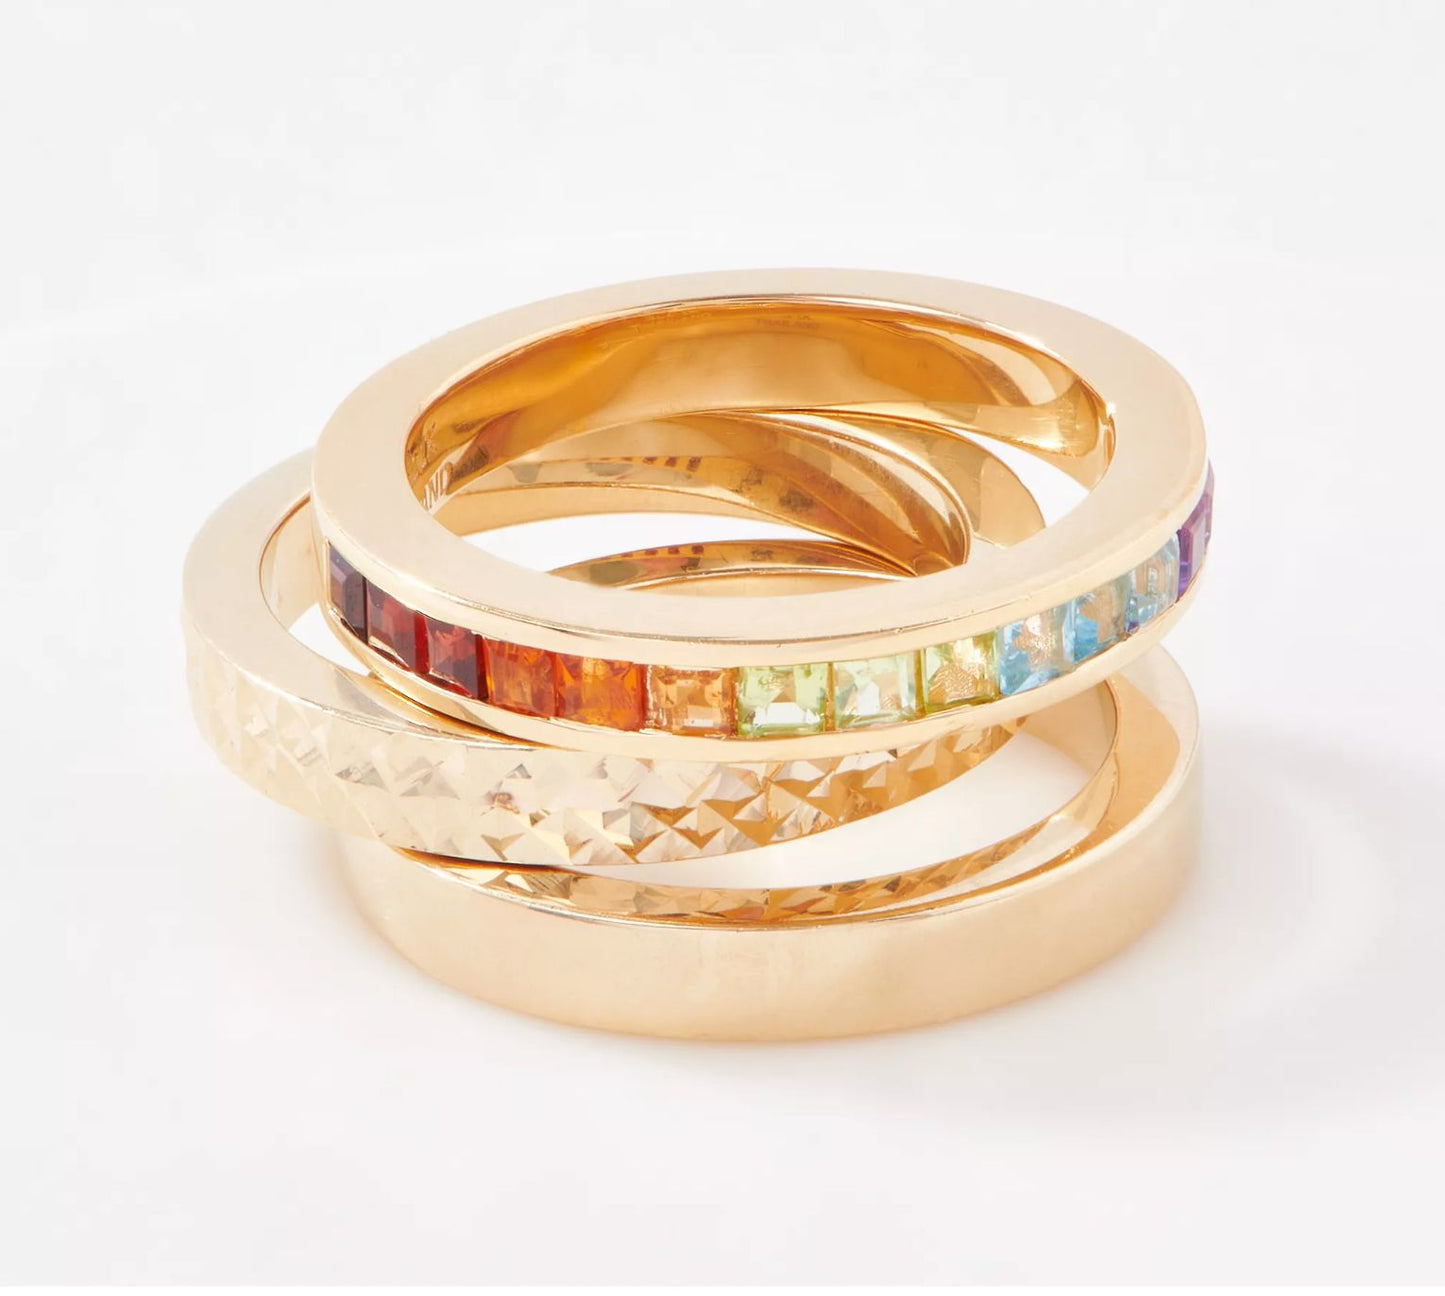 Gold One QVC 1K Gold Set of 3 Stackable Band Ring, Multicolor, Size 5